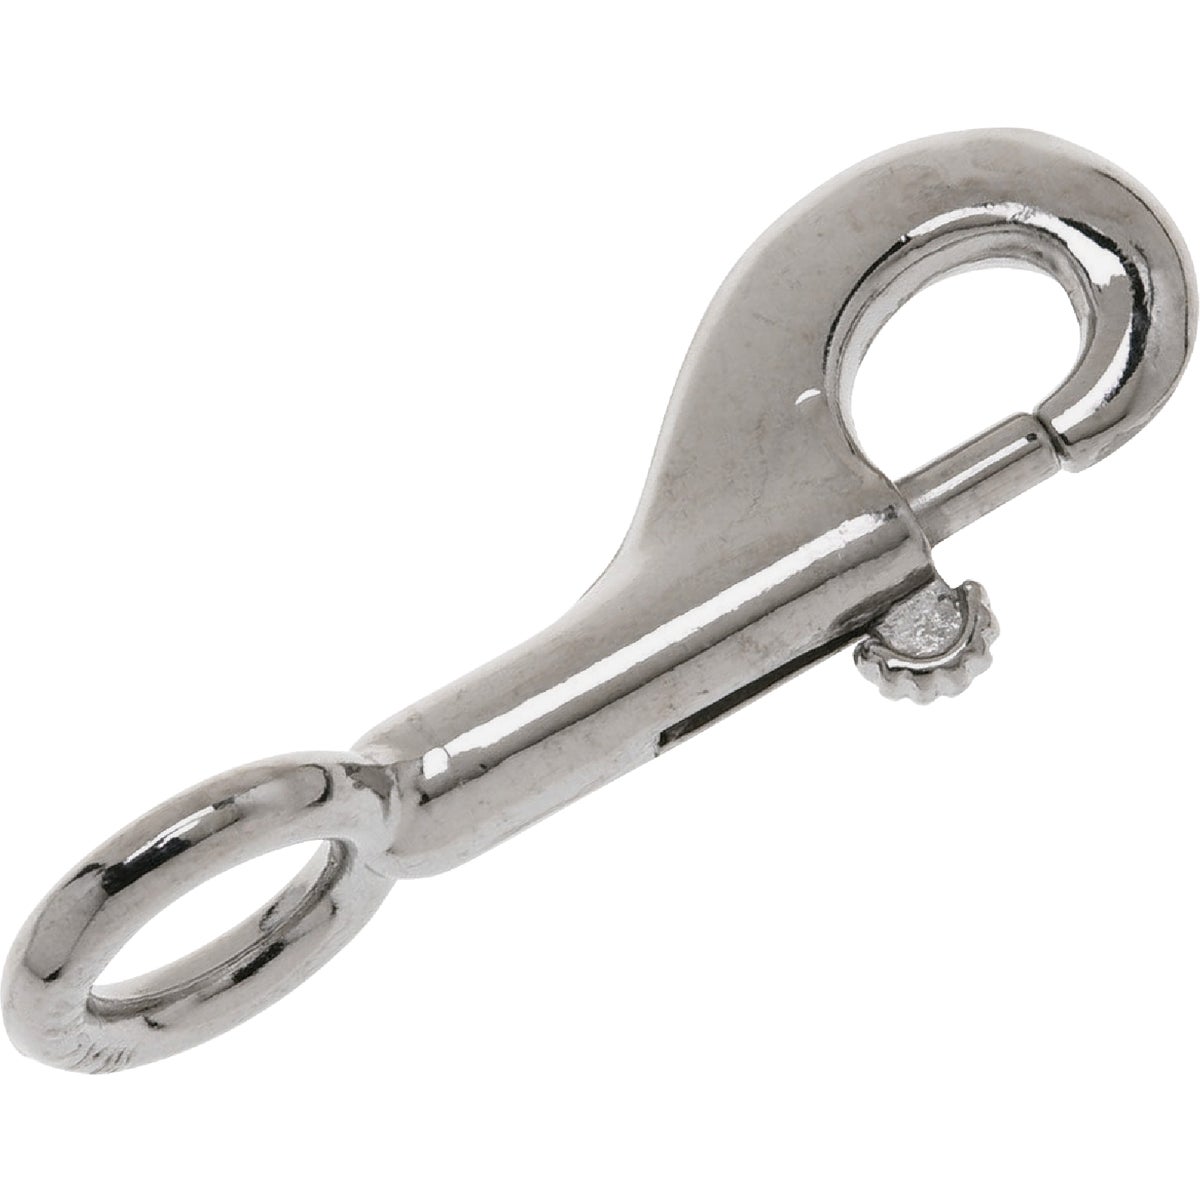 Item 769204, 5/8 In. rigid round eye bolt snap. Overall length: 3-3/8 In.